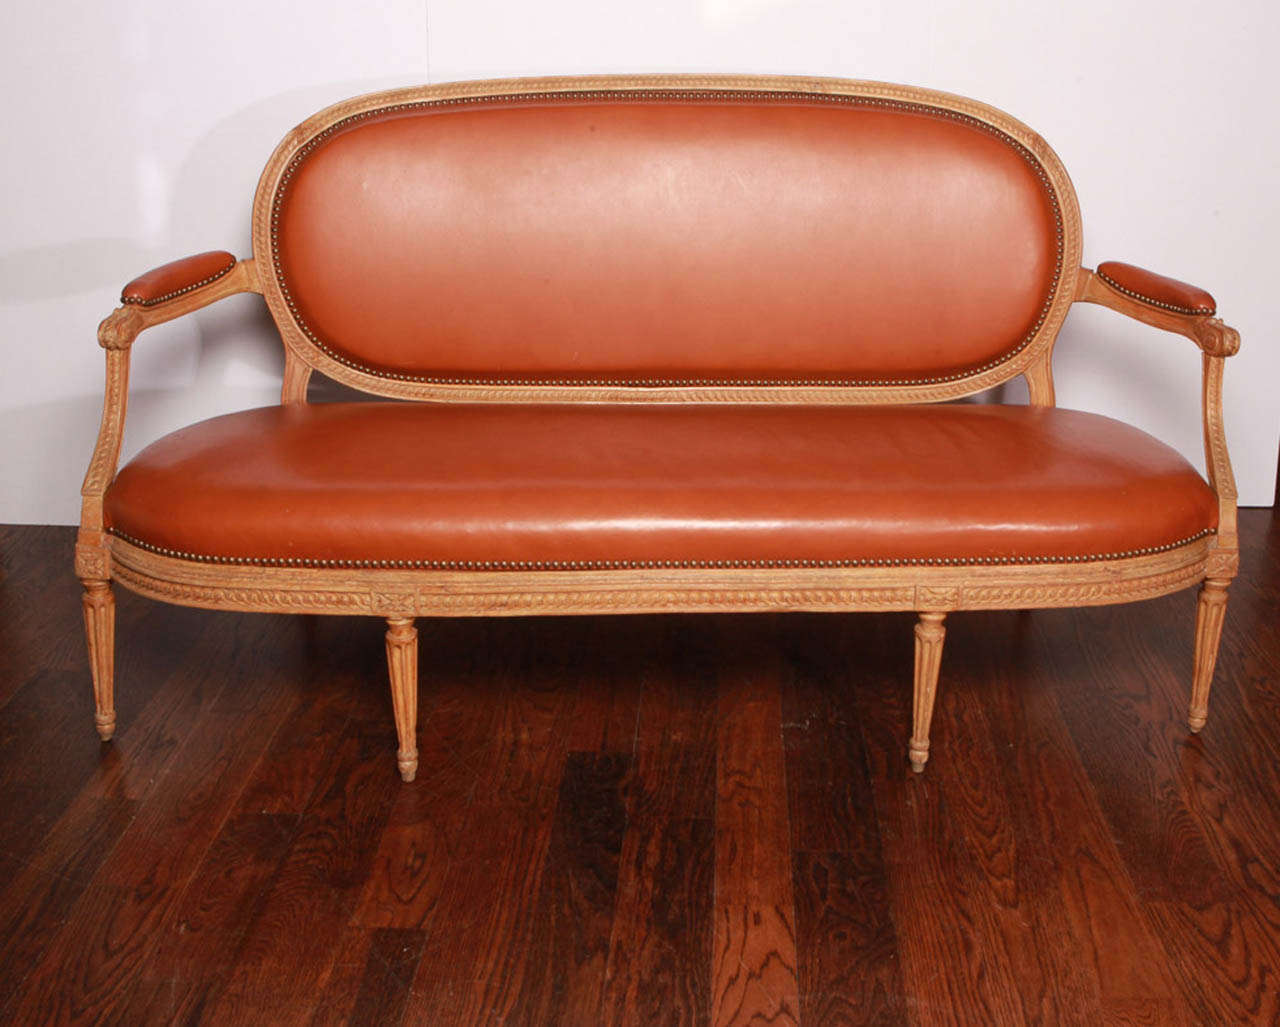 Carved beechwood frame with chestnut leather seat, back and arms. Back and seat are removable. Brass studs. Stamped 